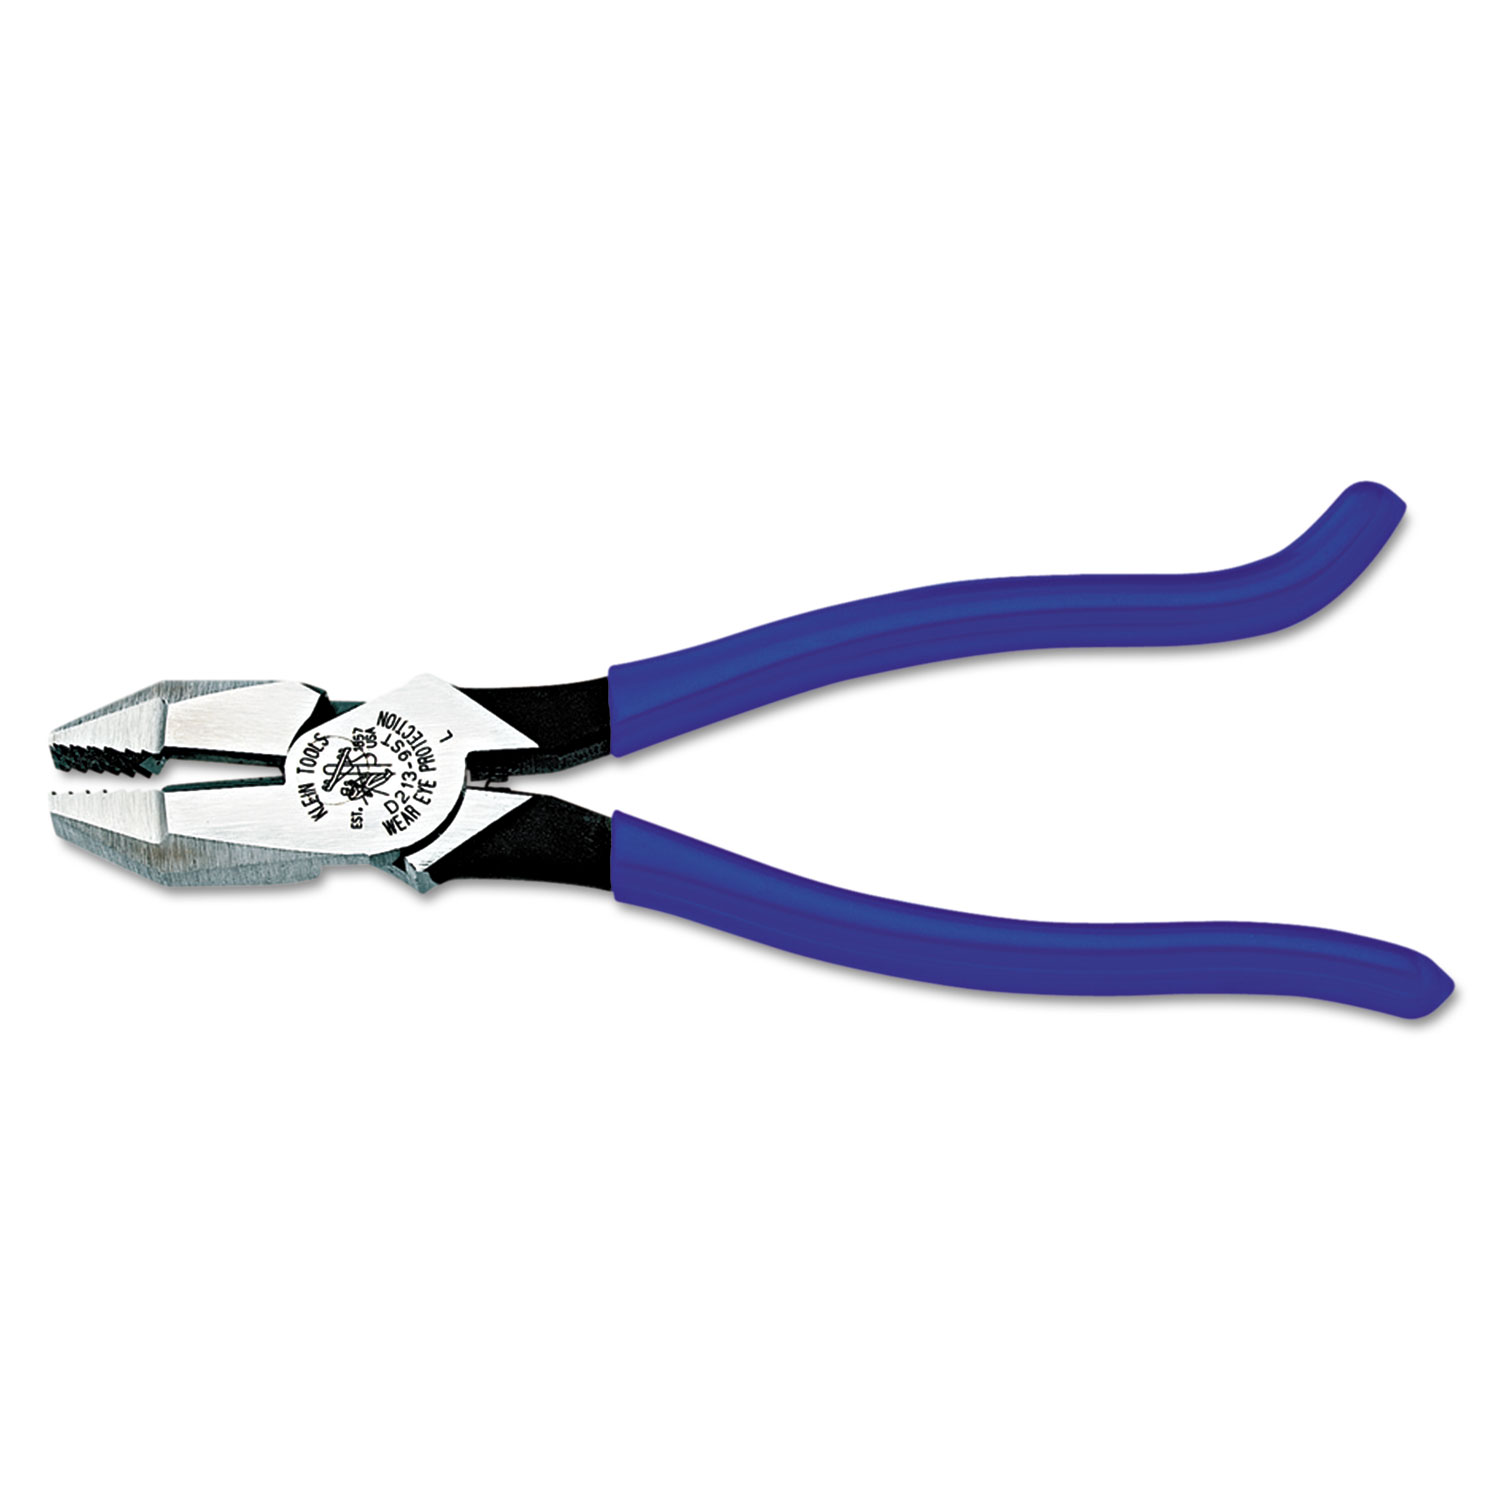 High-Leverage Ironworkers Pliers, 9 3/8in Tool Length, 25/32in Cut Length